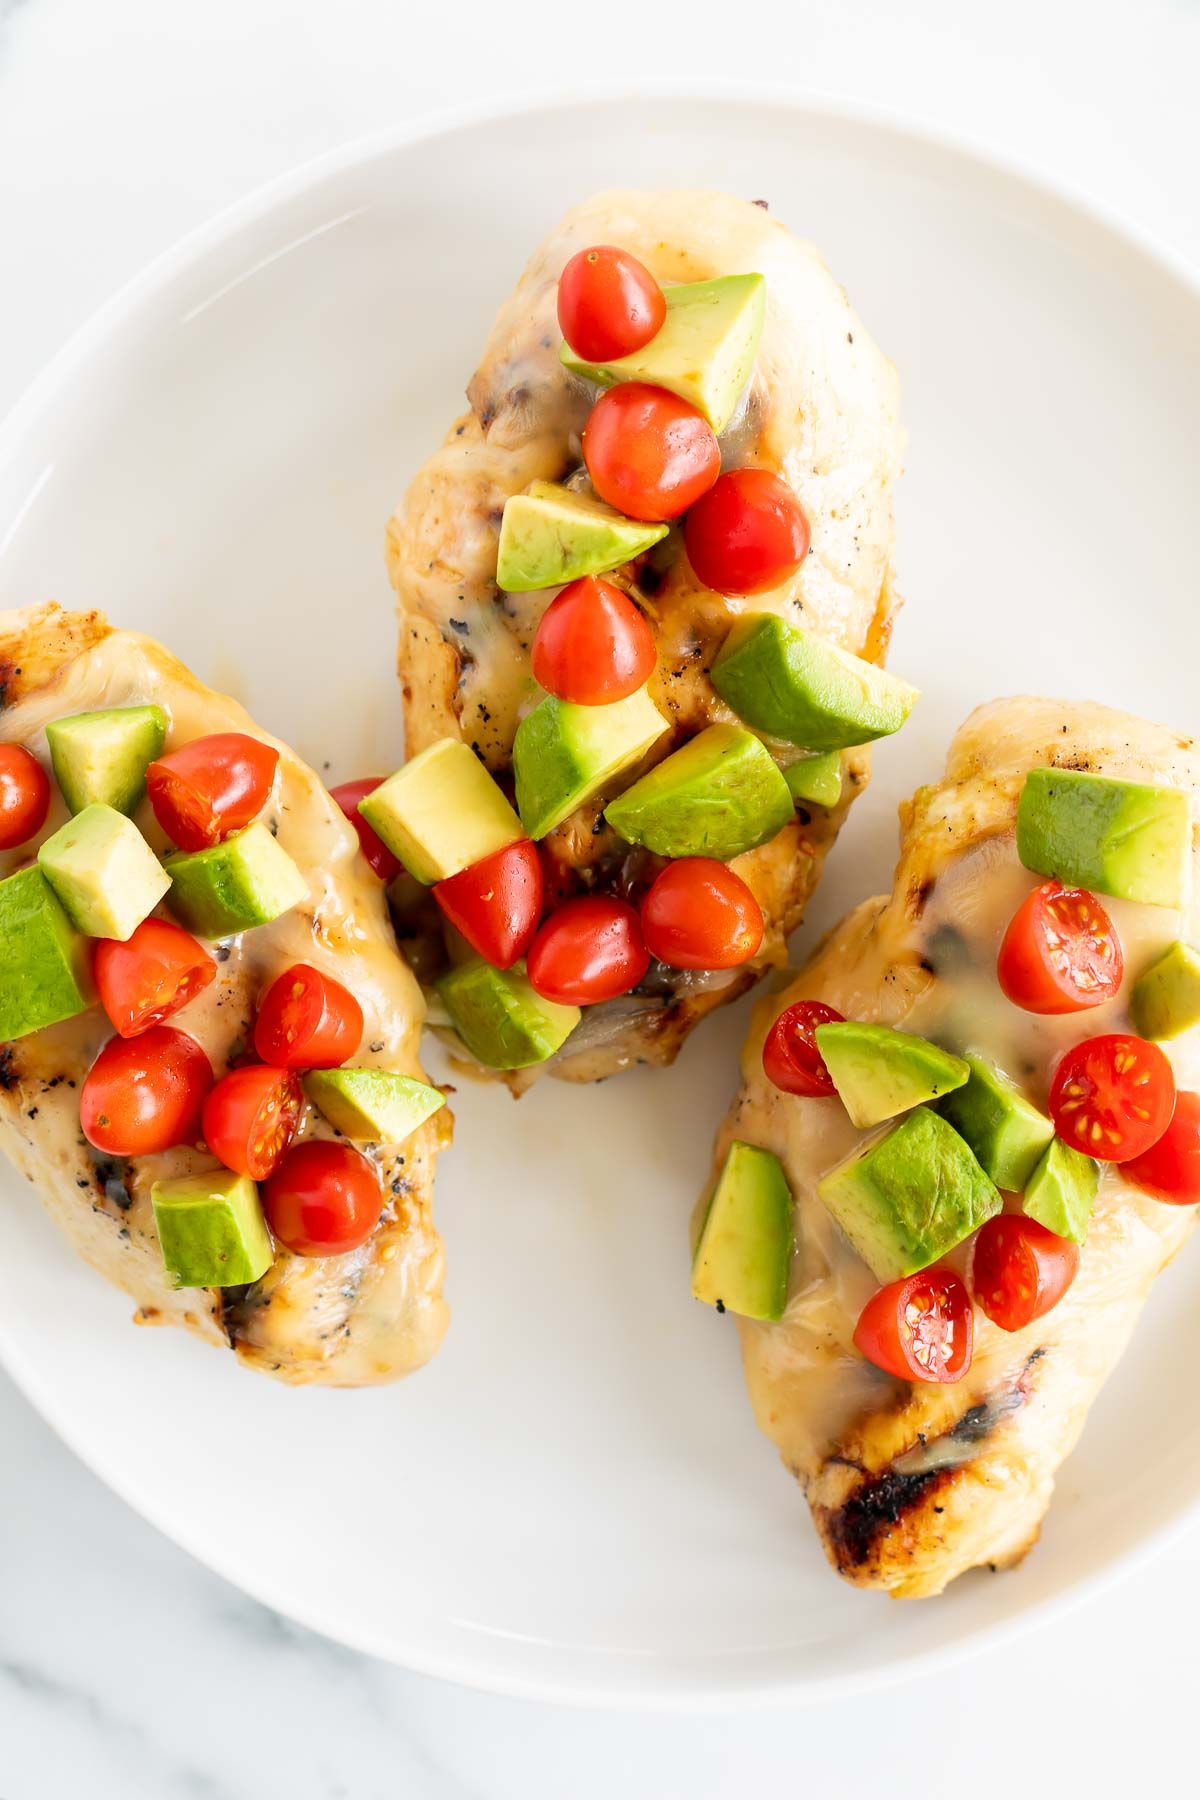 California chicken grill on a white plate, topped with diced avocado and tomato.